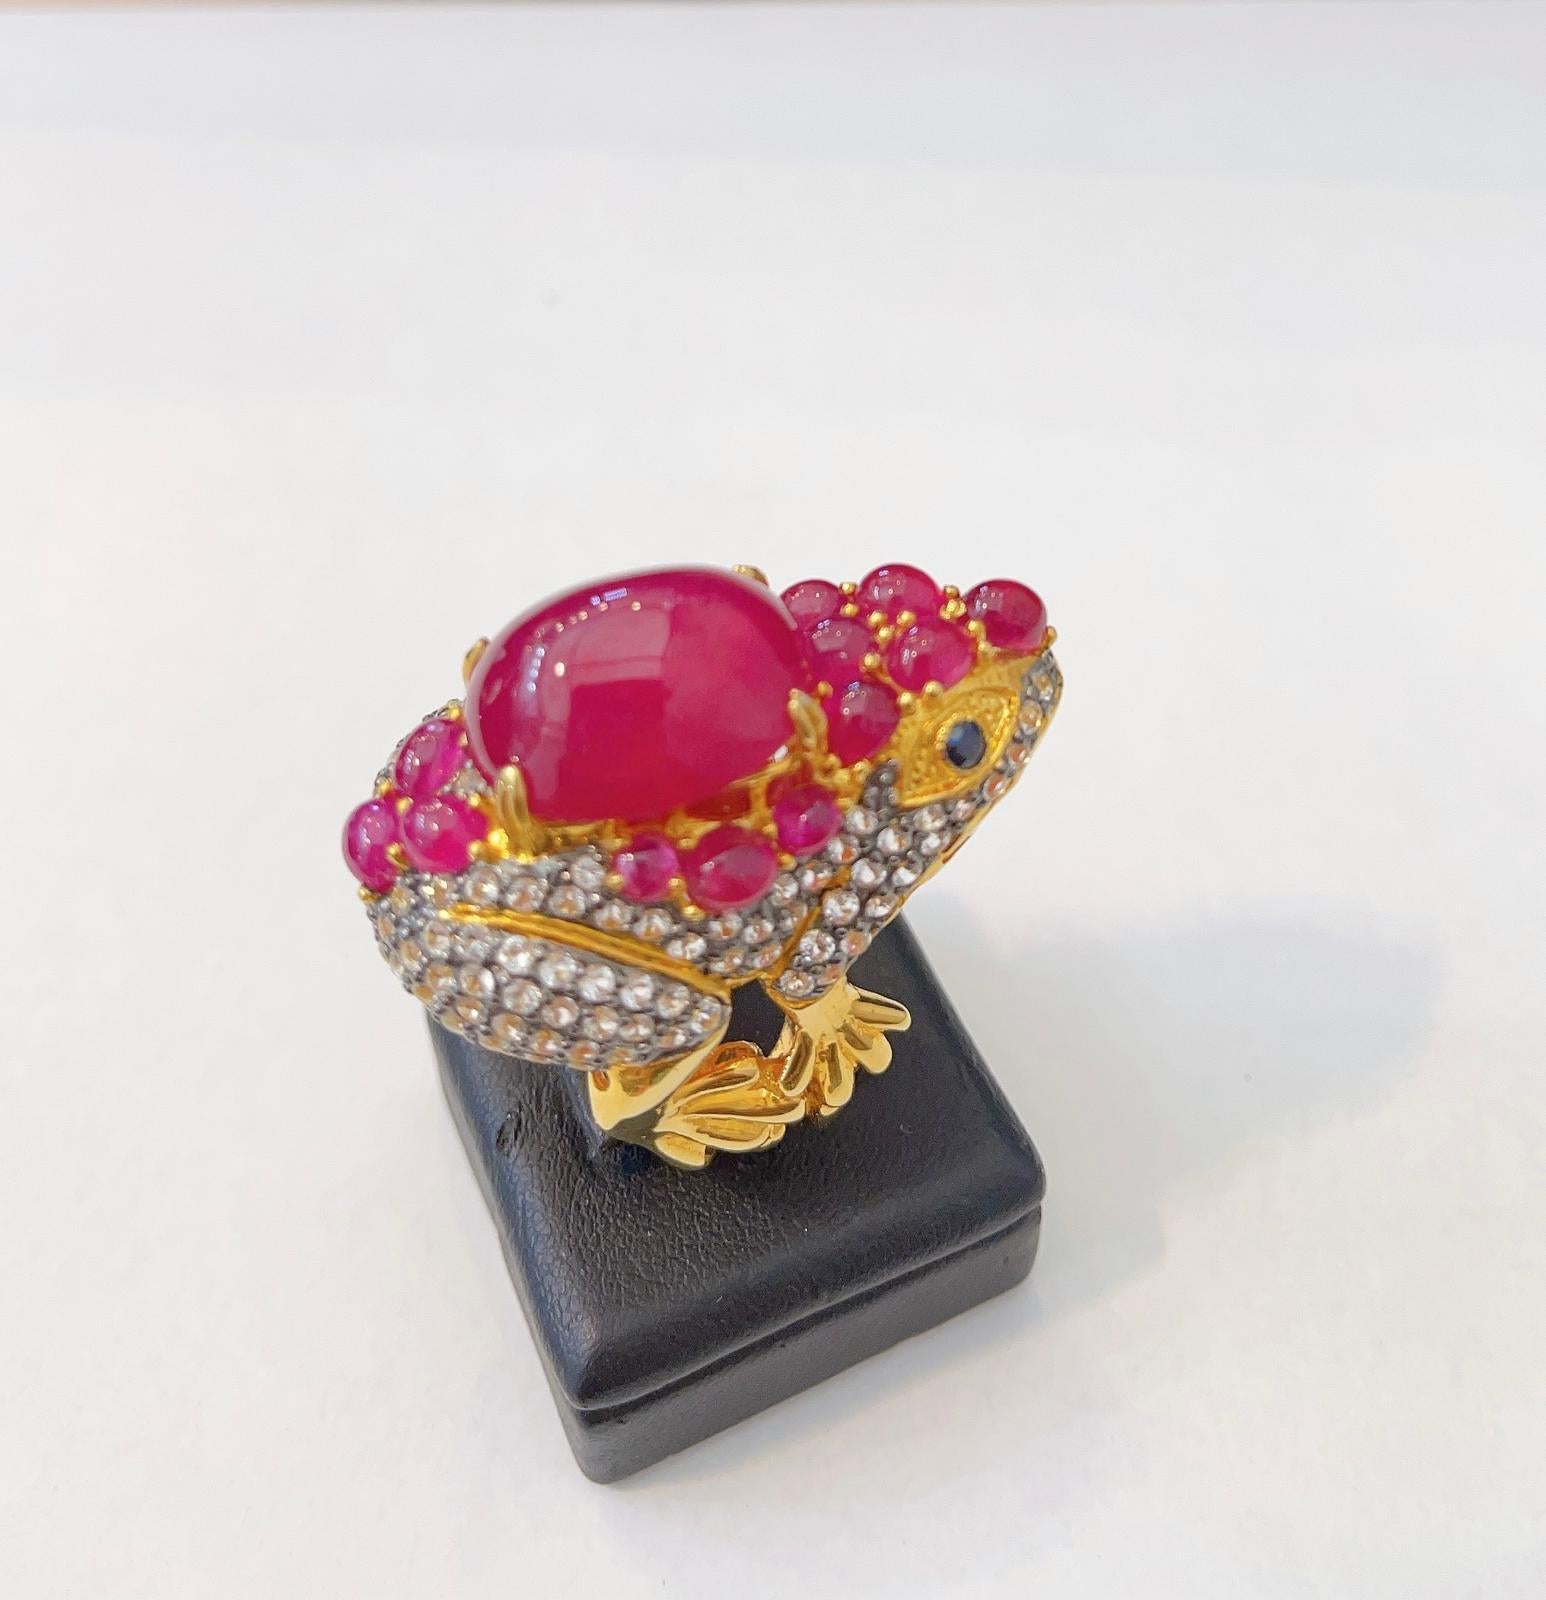 “Orient” Red Ruby & White Topaz Cocktail Ring Set in 22k Gold & Silver For Sale 10